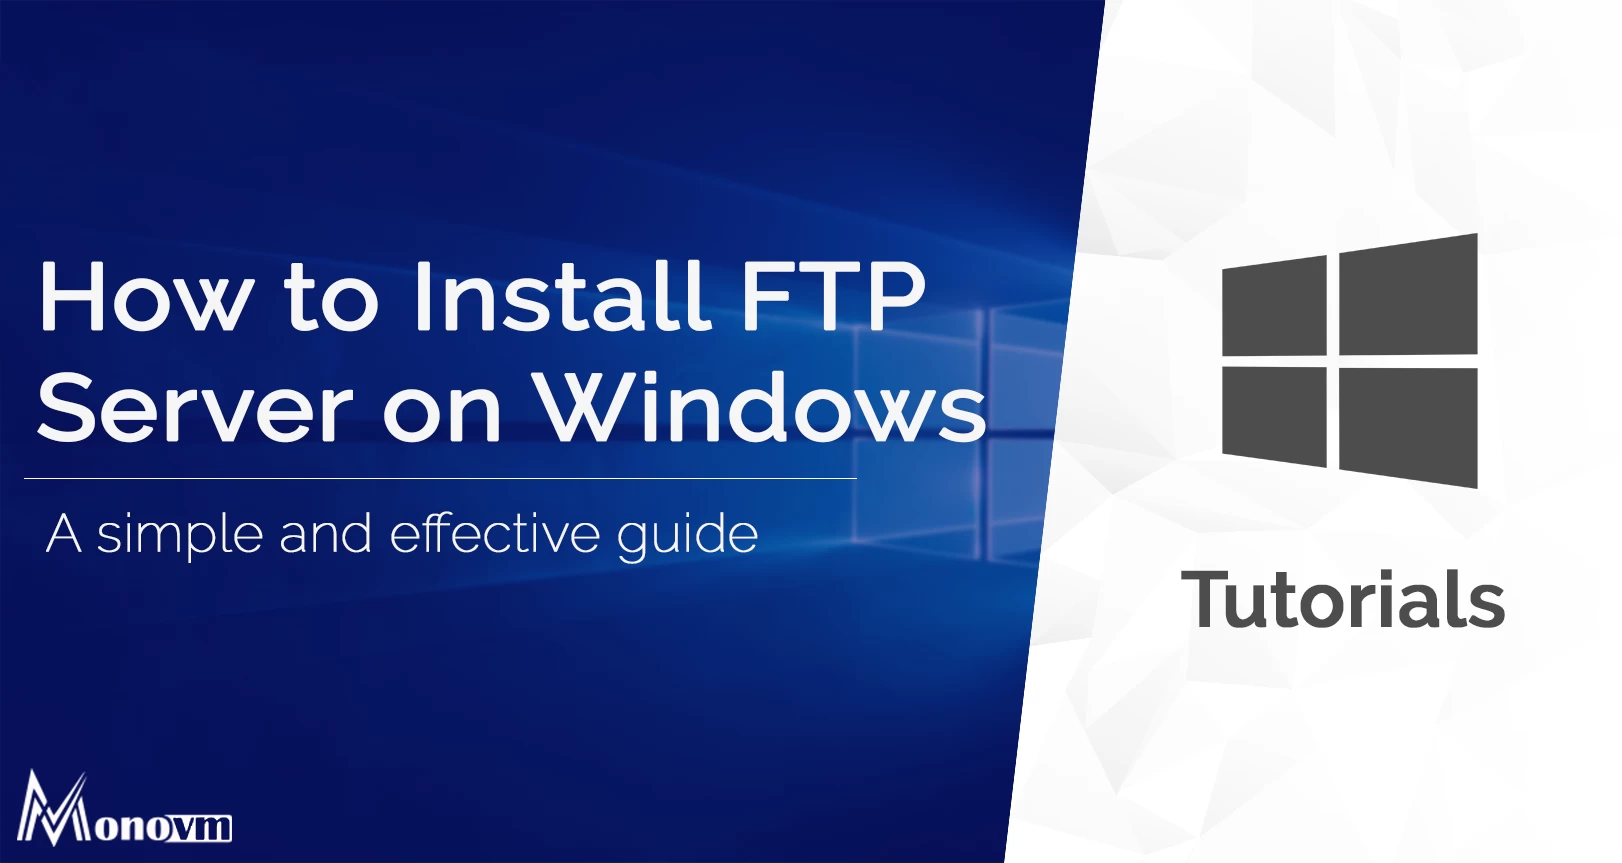 How to Install FTP Server on Windows